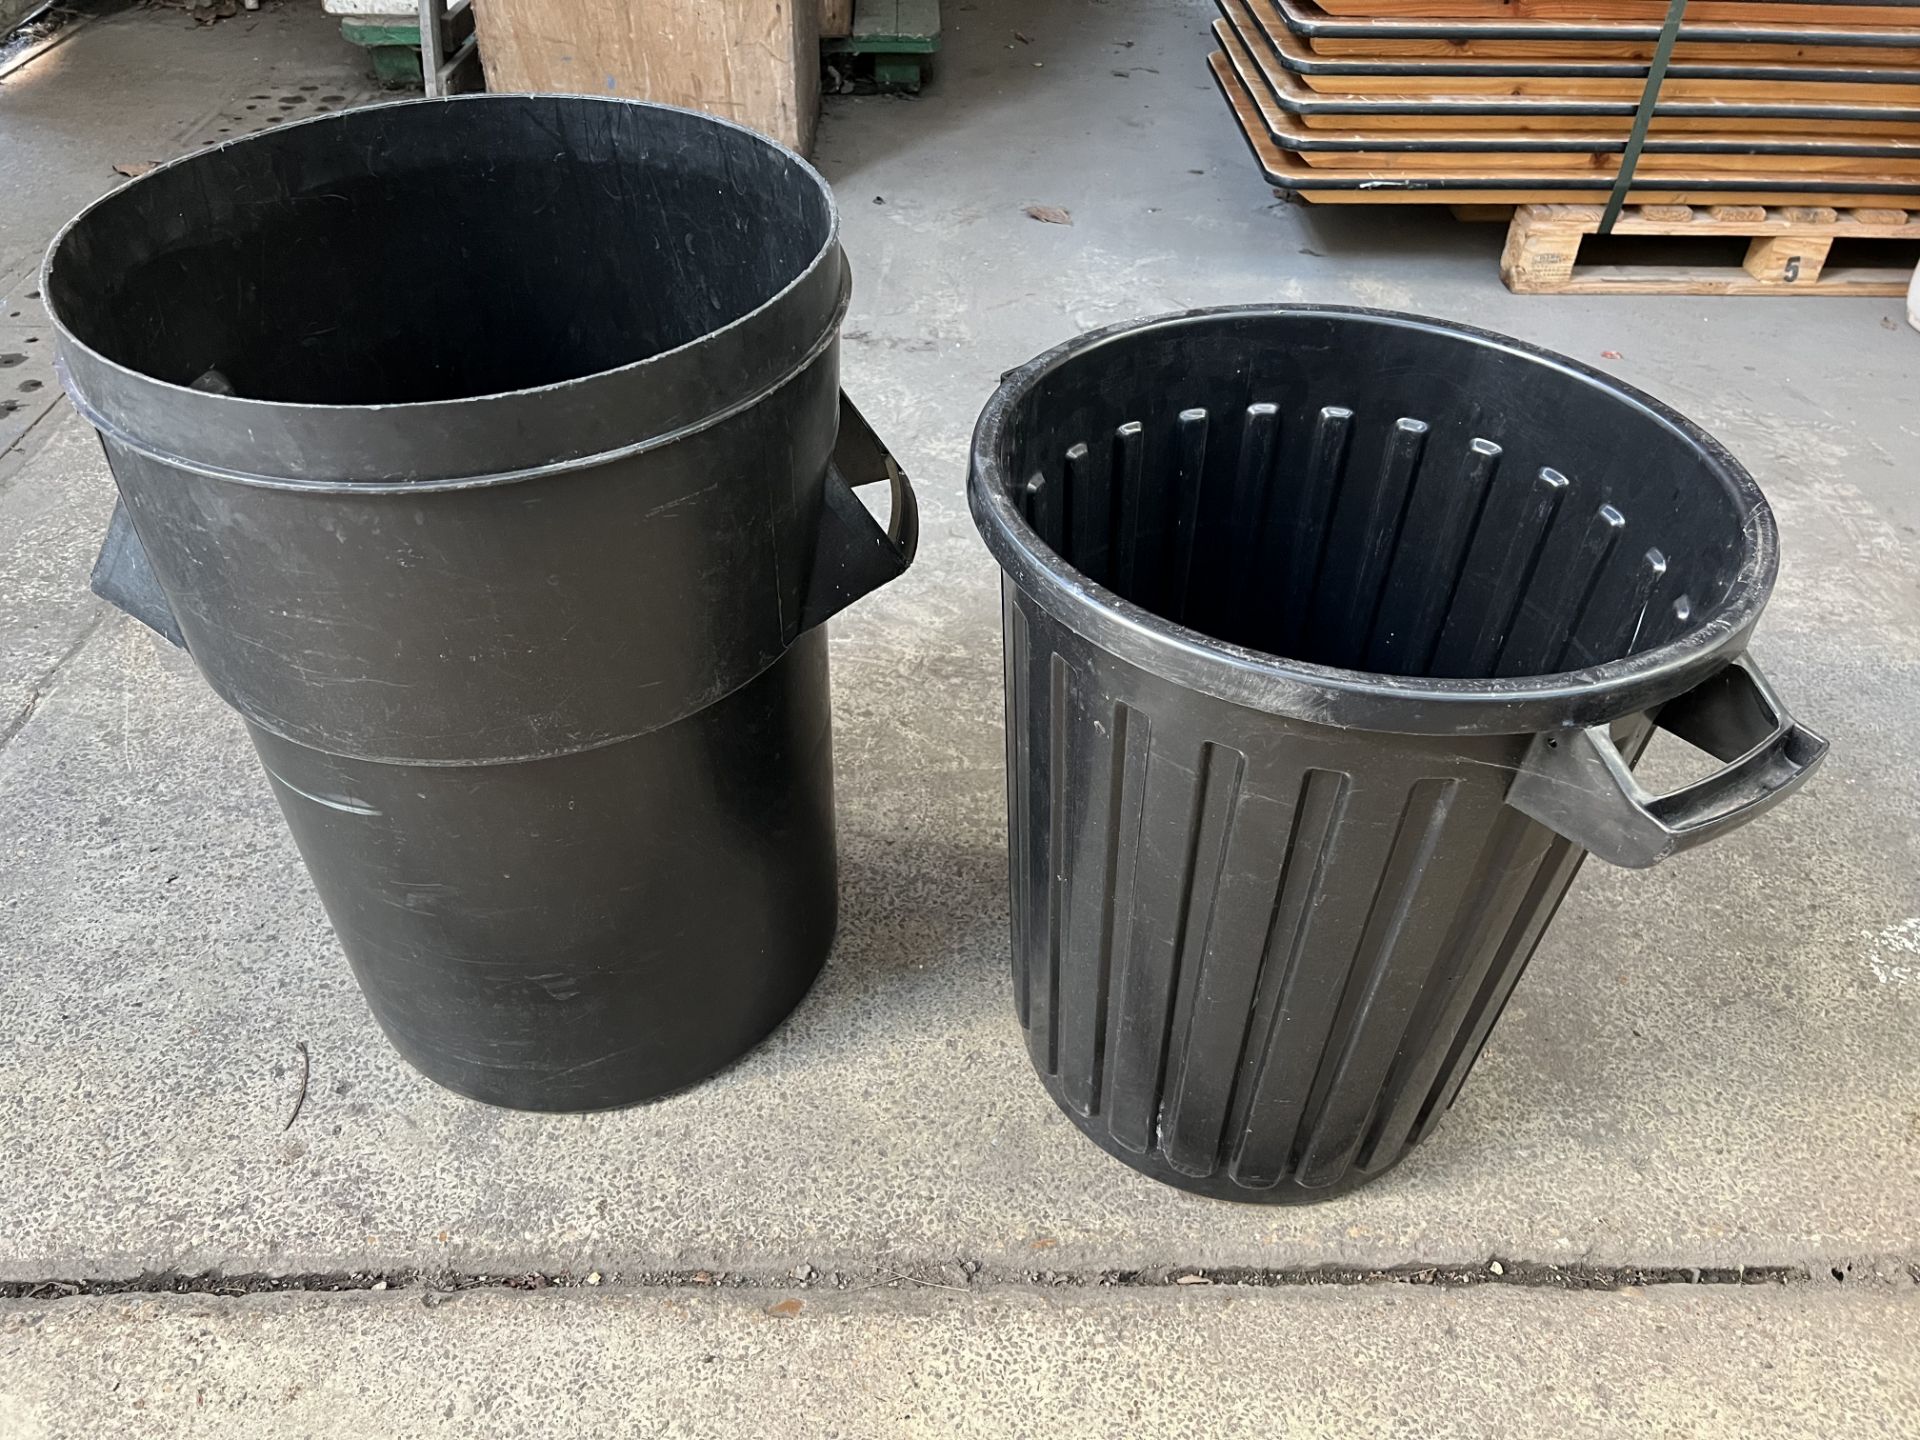 16 black plastic dust bins. This lot is subject to VAT.